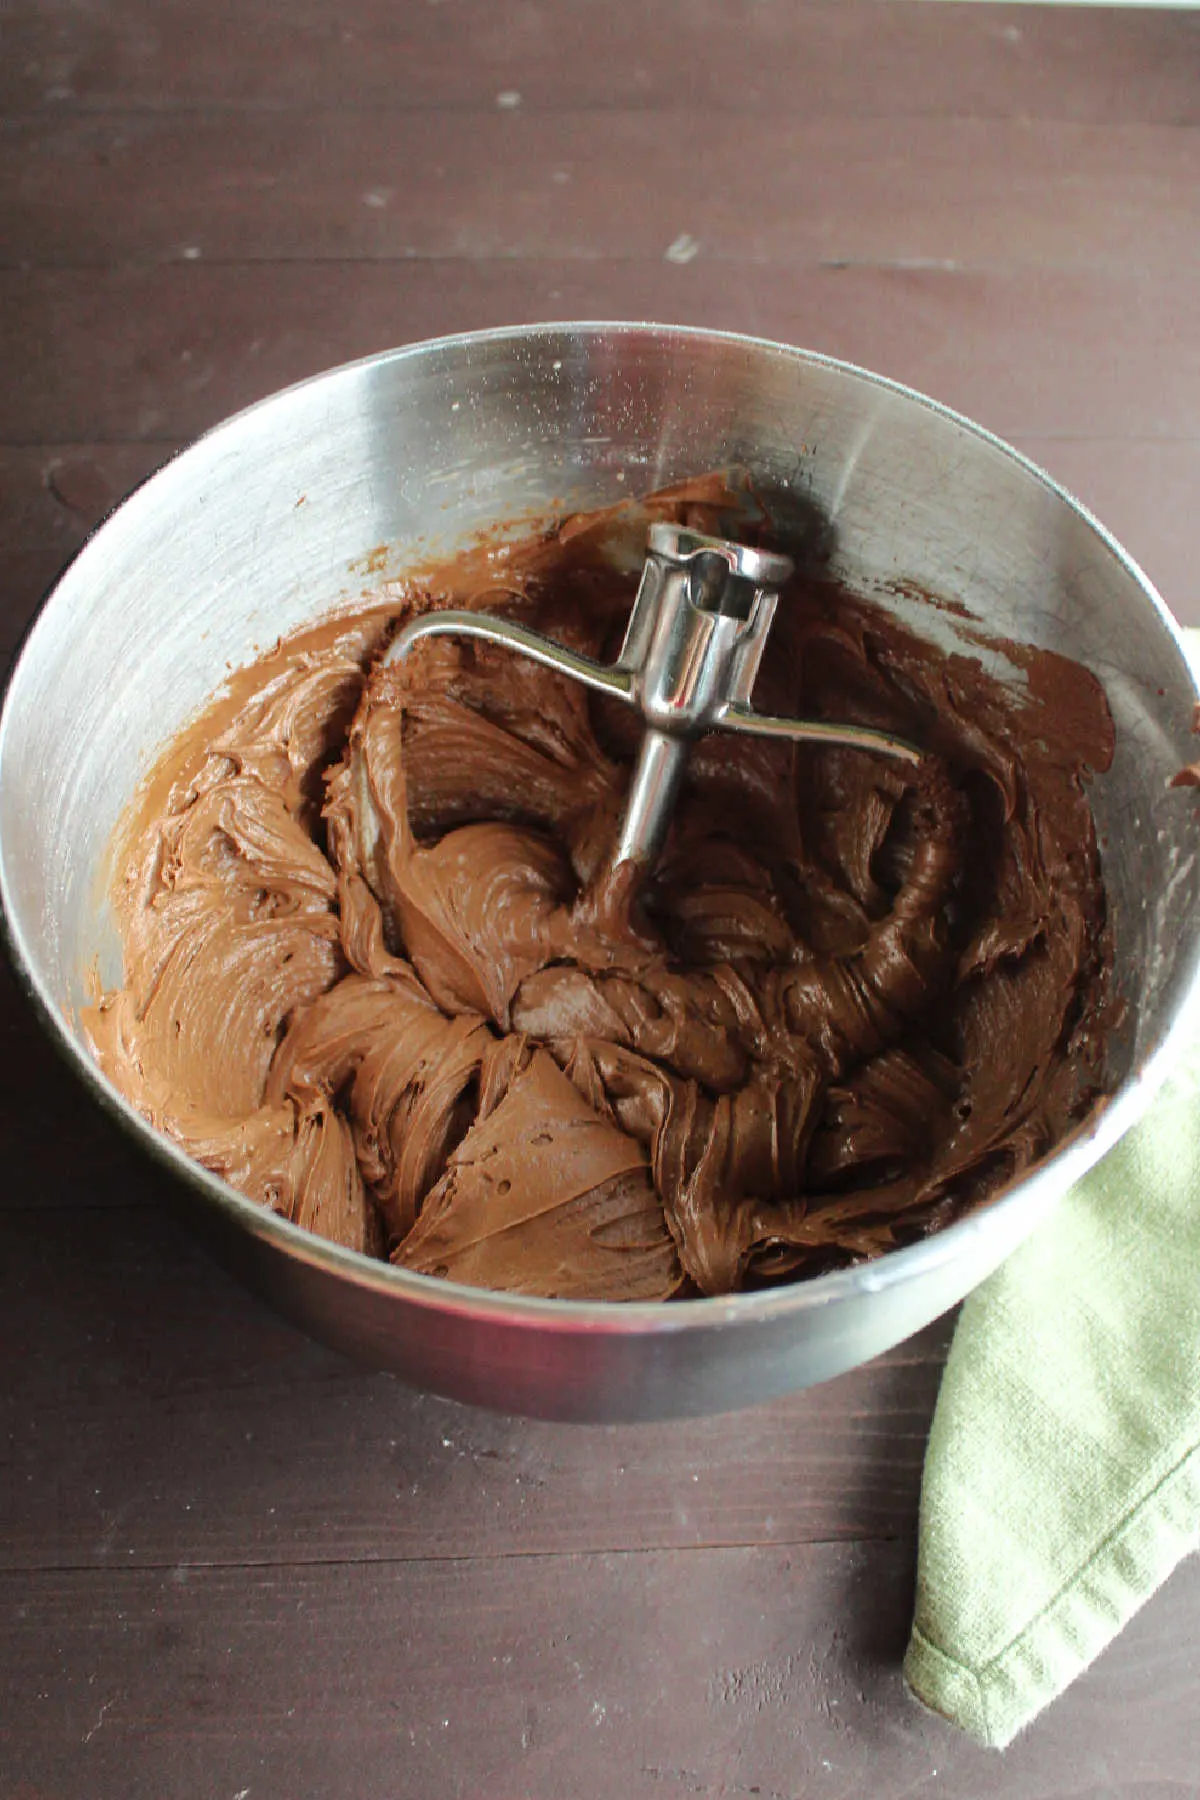 Mixer bowl of chocolate frosting ready to go on brownies.